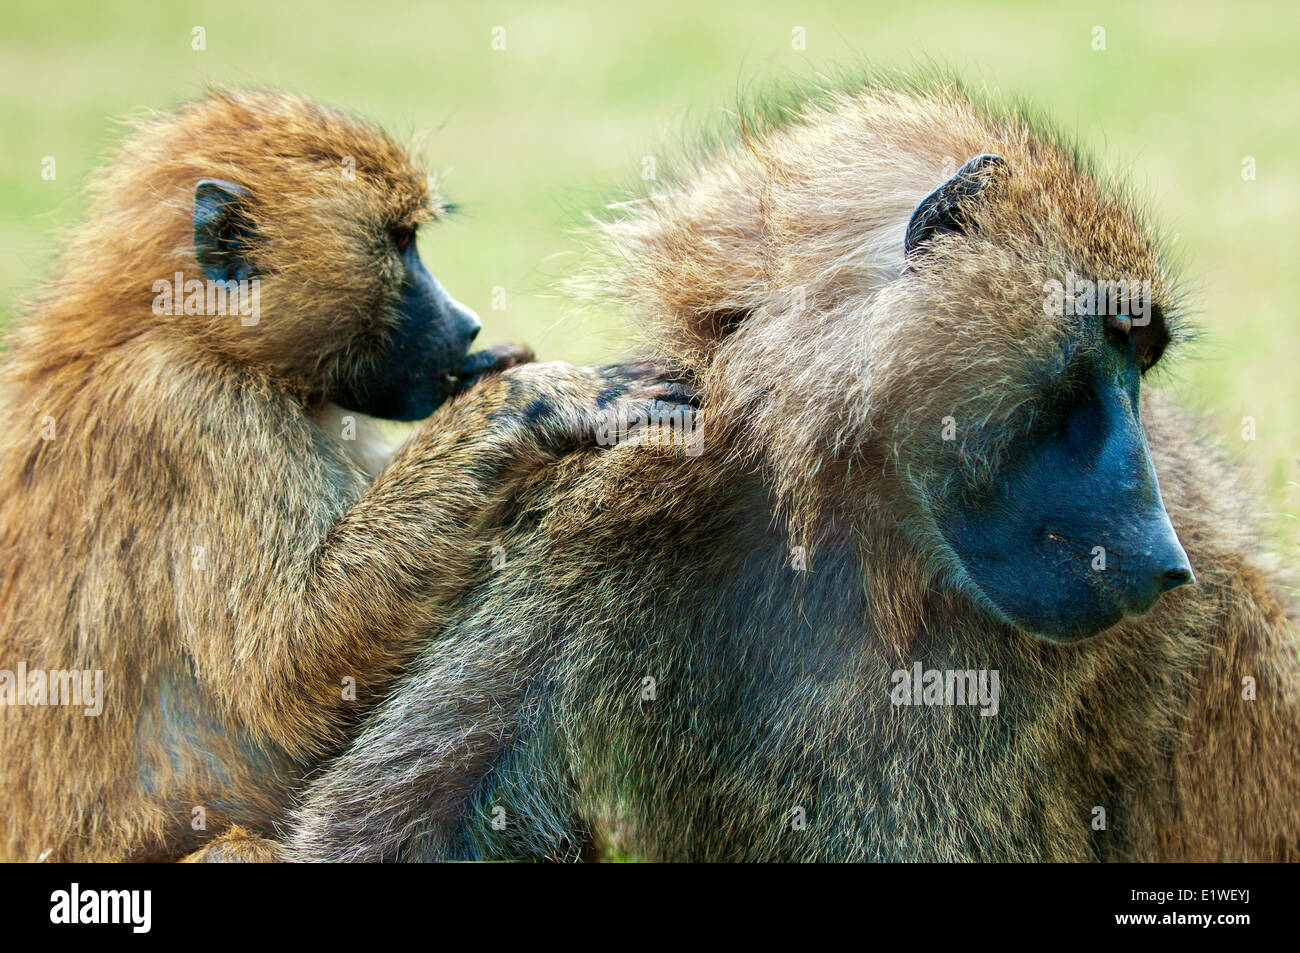 Olive baboons (papio anubis) grooming each other, Kenya, East Africa Stock Photo